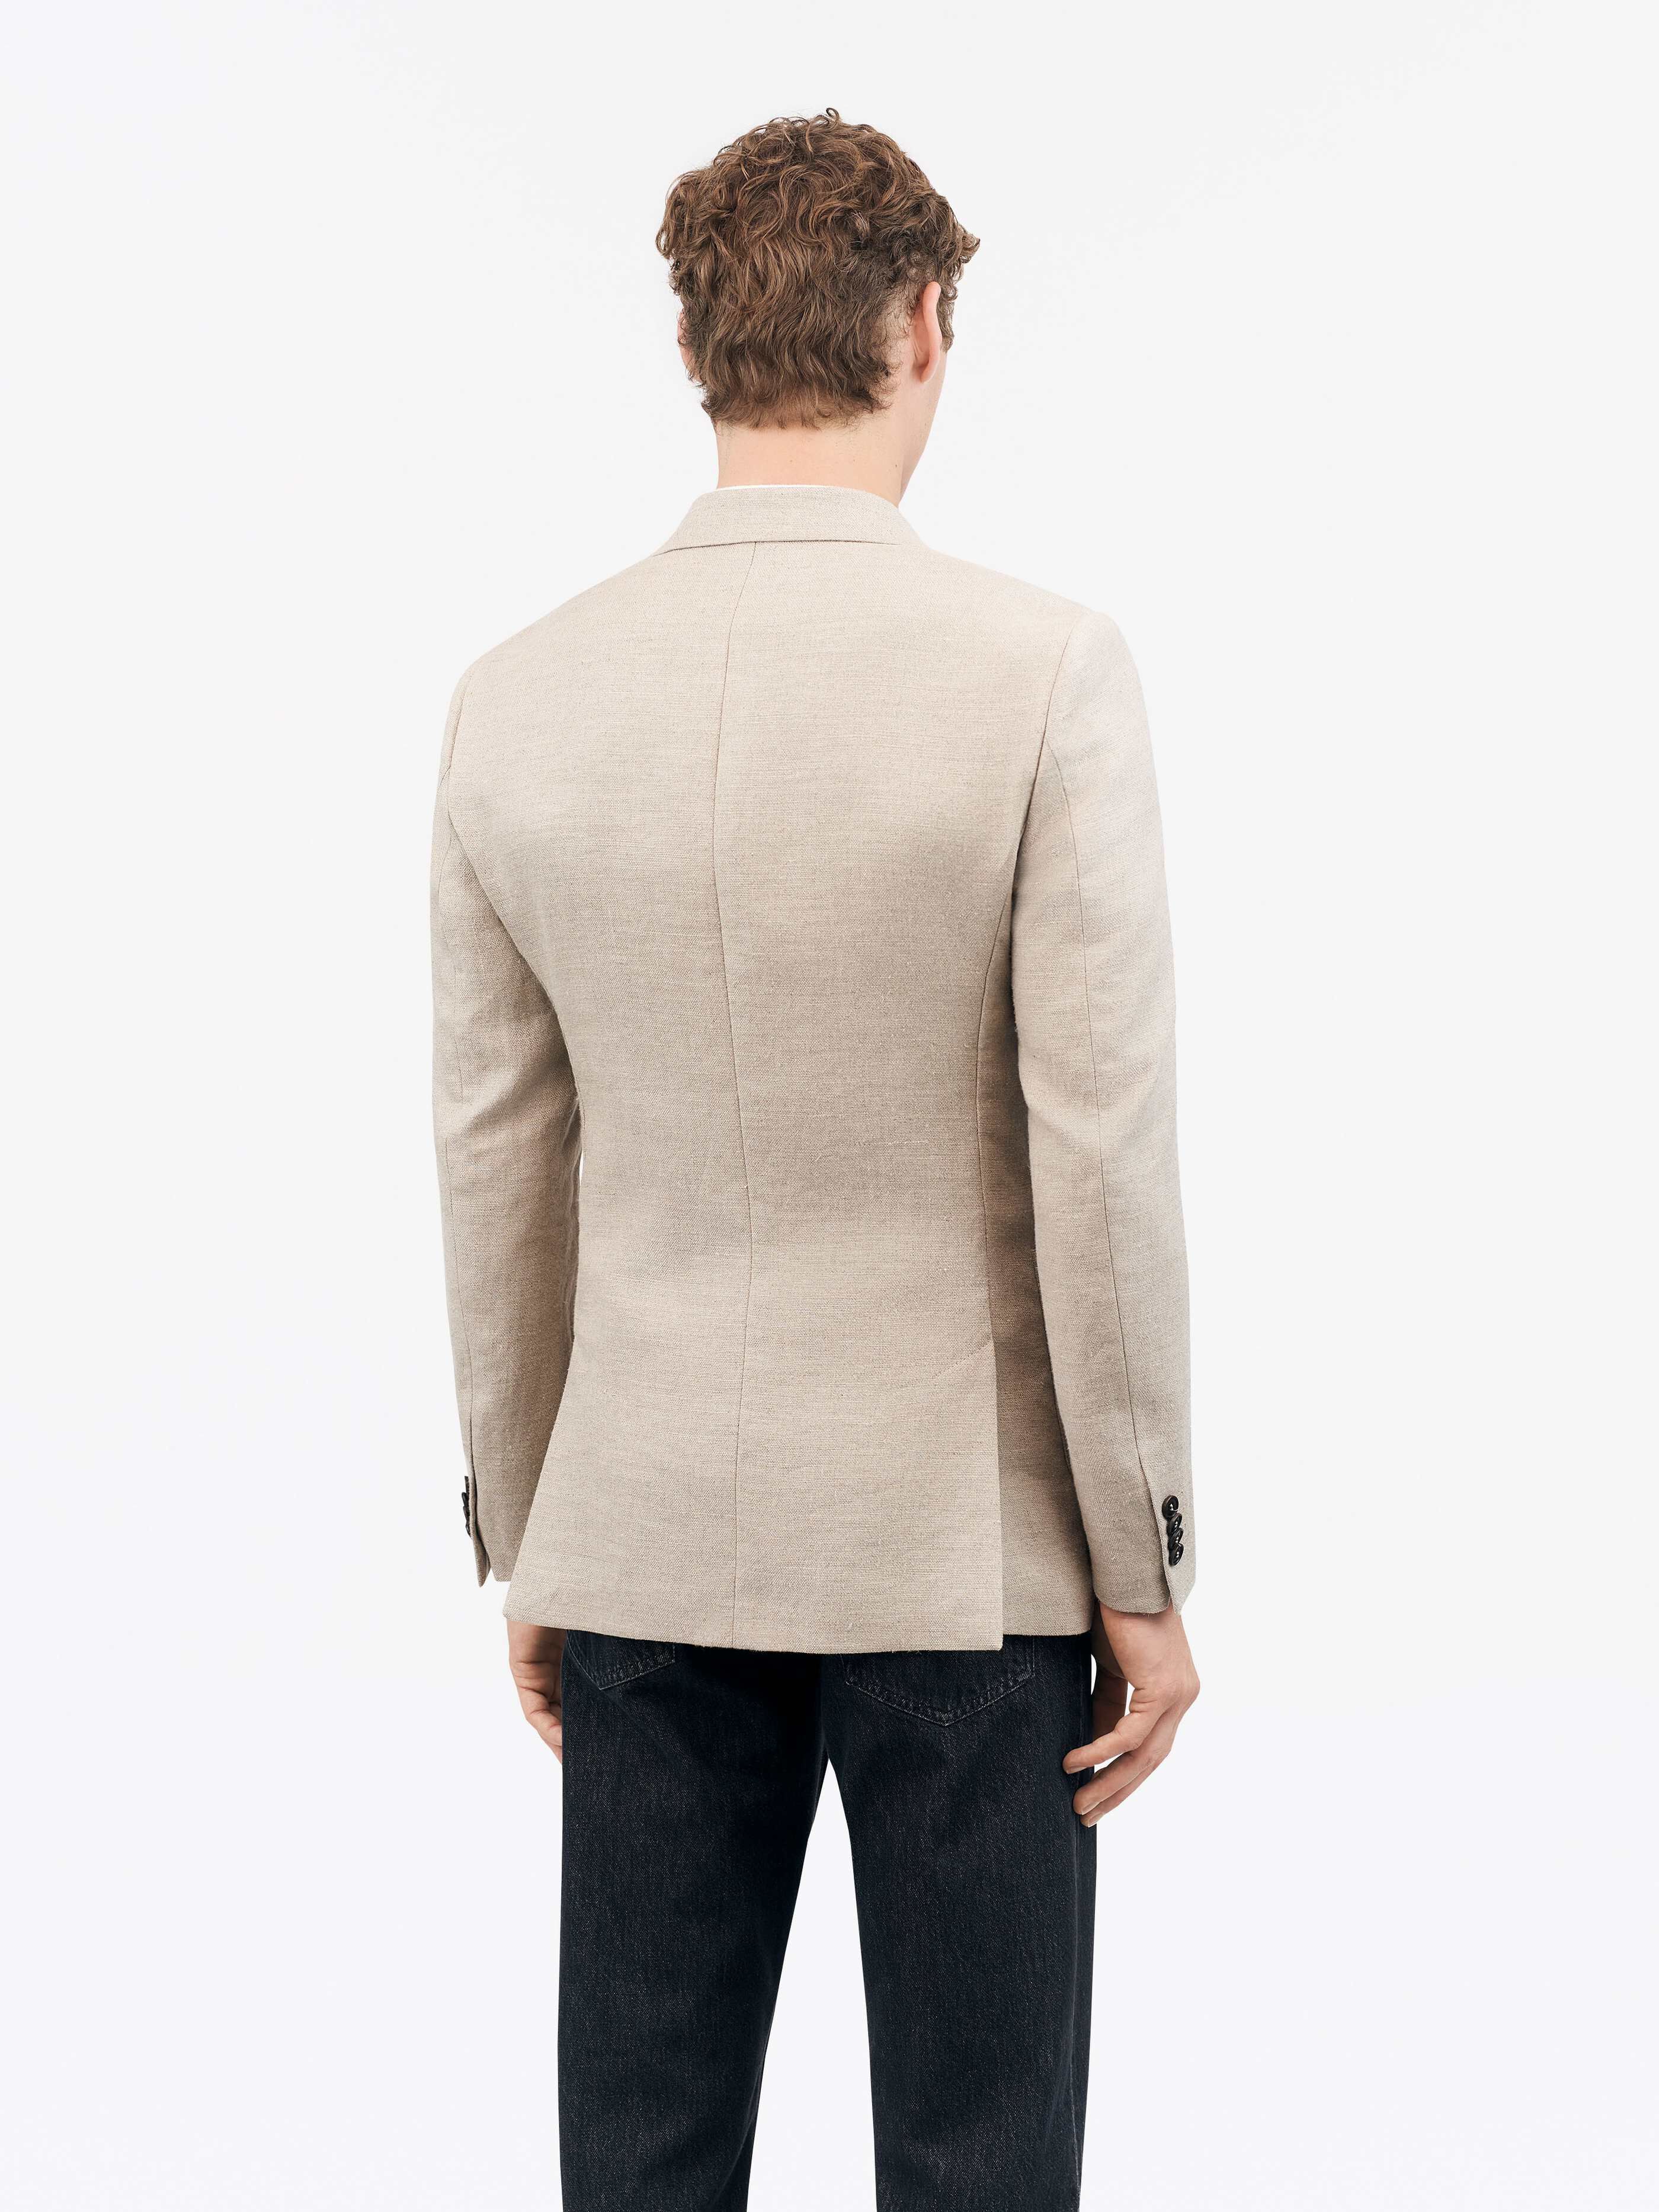 TIGER OF SWEDEN Justin HL Casual Blazer in Beige T70223005 | Shop from eightywingold an official brand partner for Tiger of Sweden Canada and US.